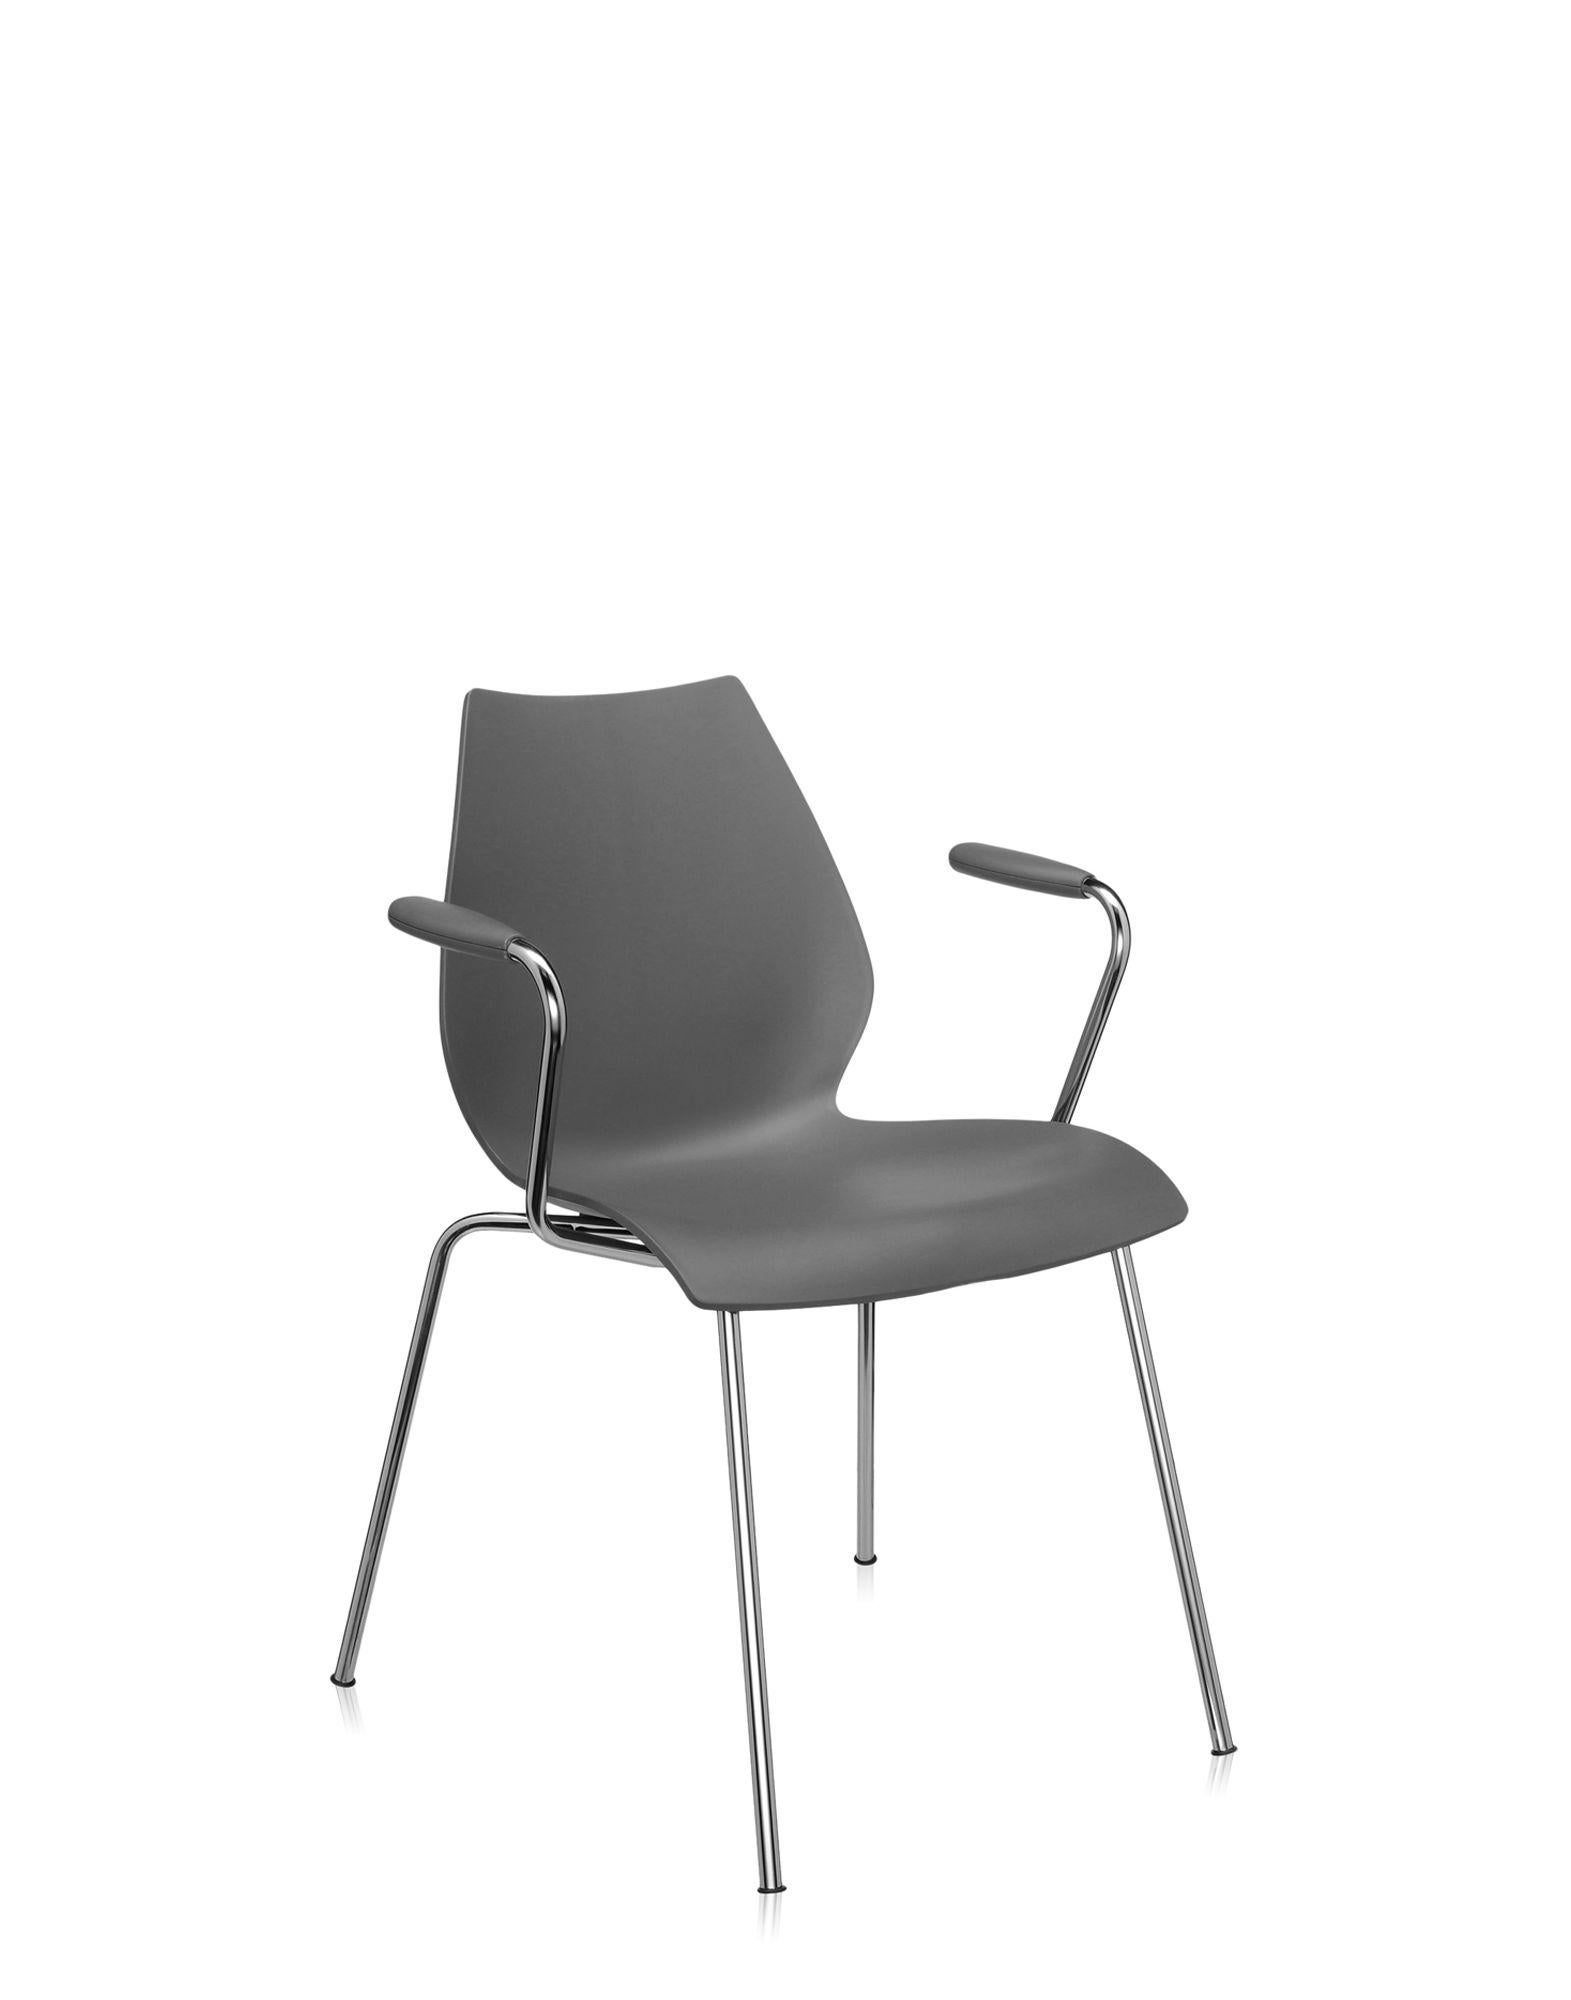 Its elegant lines, sober colours and practical usage make Maui an extremely versatile chair, capable of satisfying the widest demands of the business and residential market. Maui chairs form a family rich in chromatic and formal variations, able to